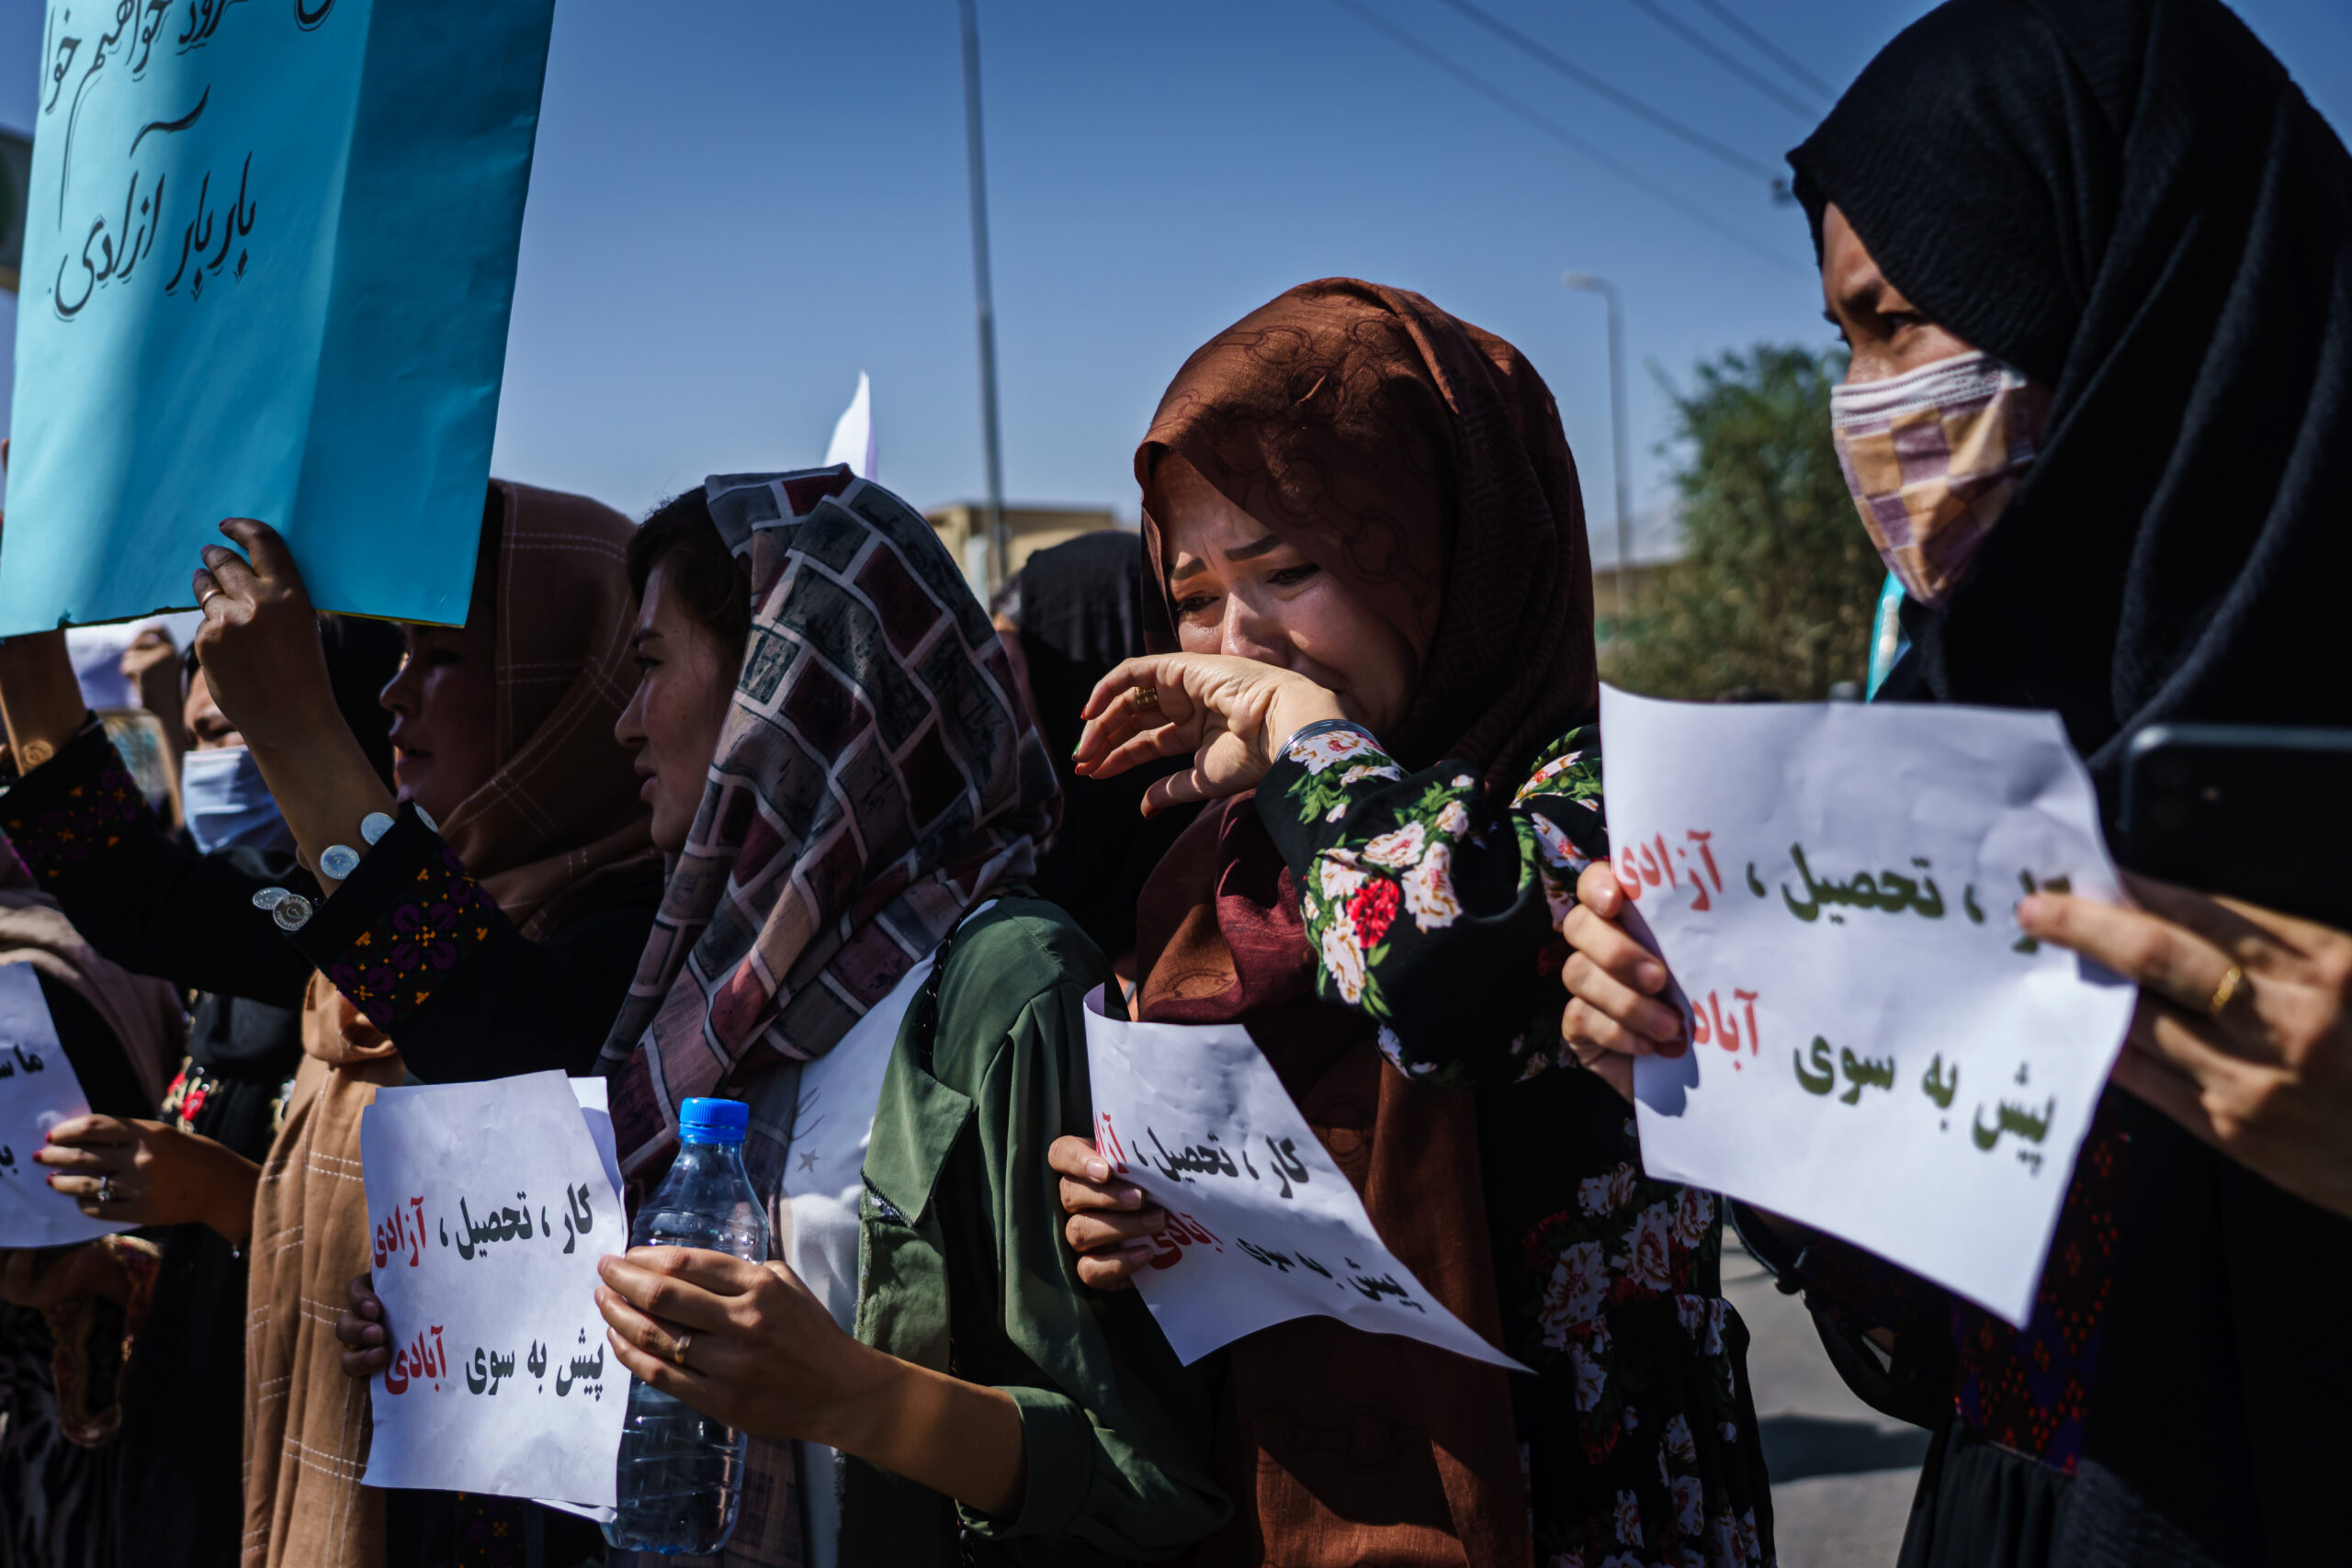 Afghanistan: One year of the Taliban’s broken promises, draconian restrictions and violence